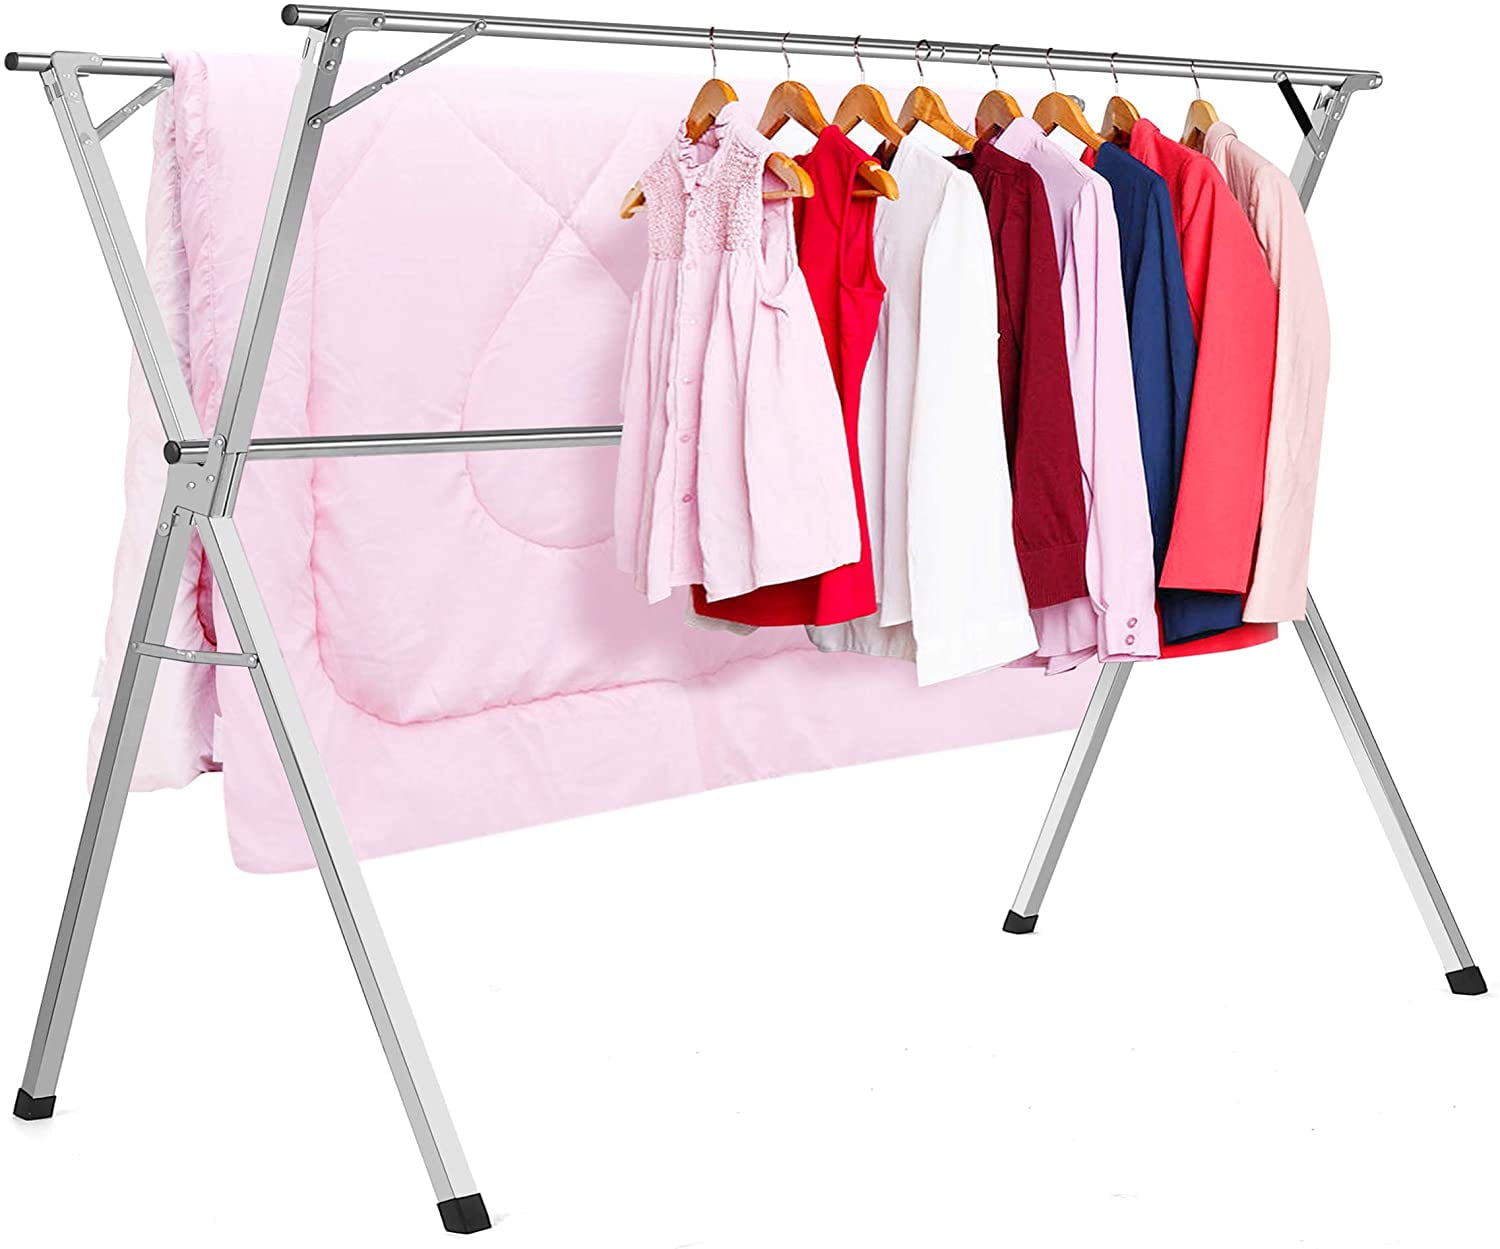 Clothes Drying Racks Stainless Steel Laundry Drying Rack Heavy Duty Collapsible 